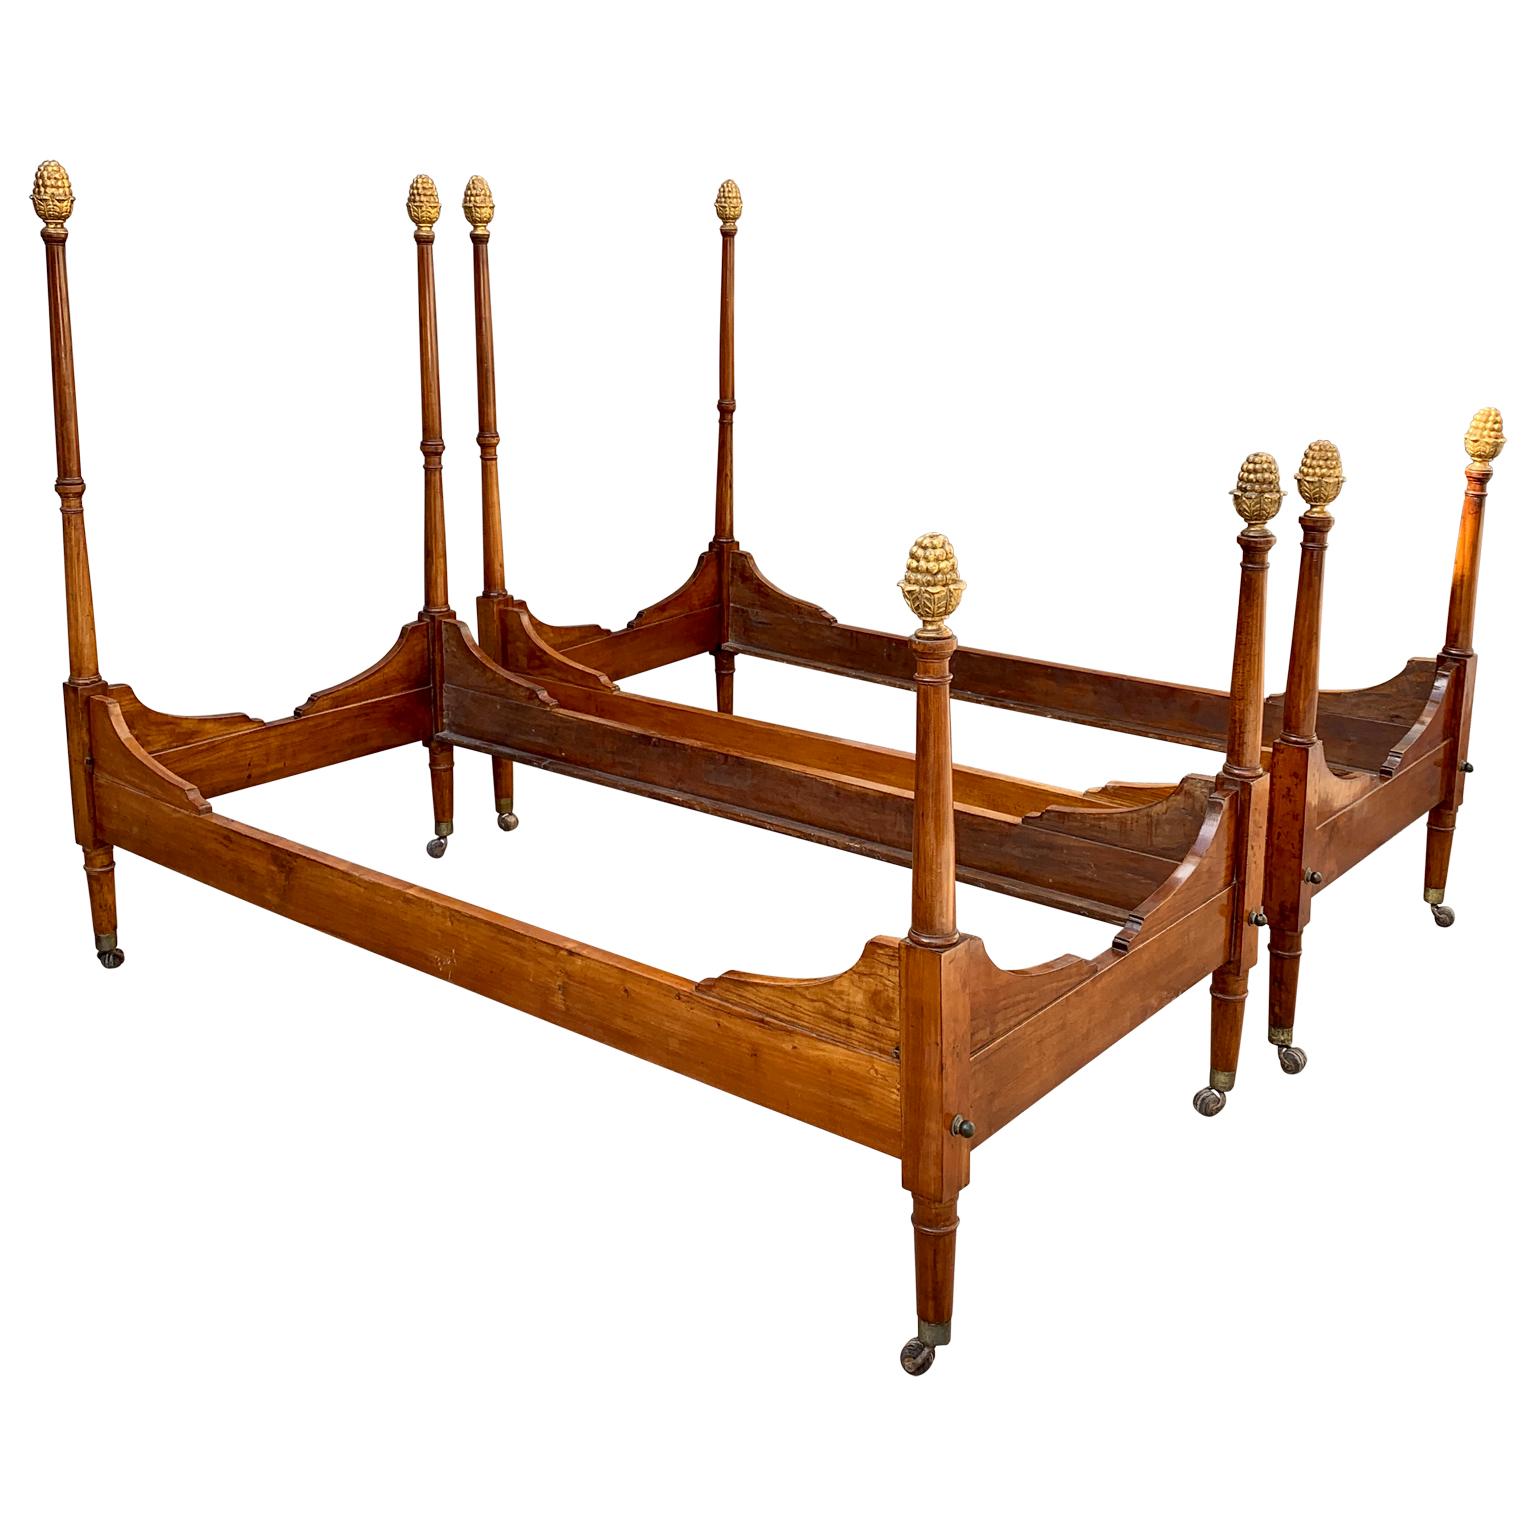 Hand-Carved Pair of Period Empire Beds from Tuscany Italy, circa 1810